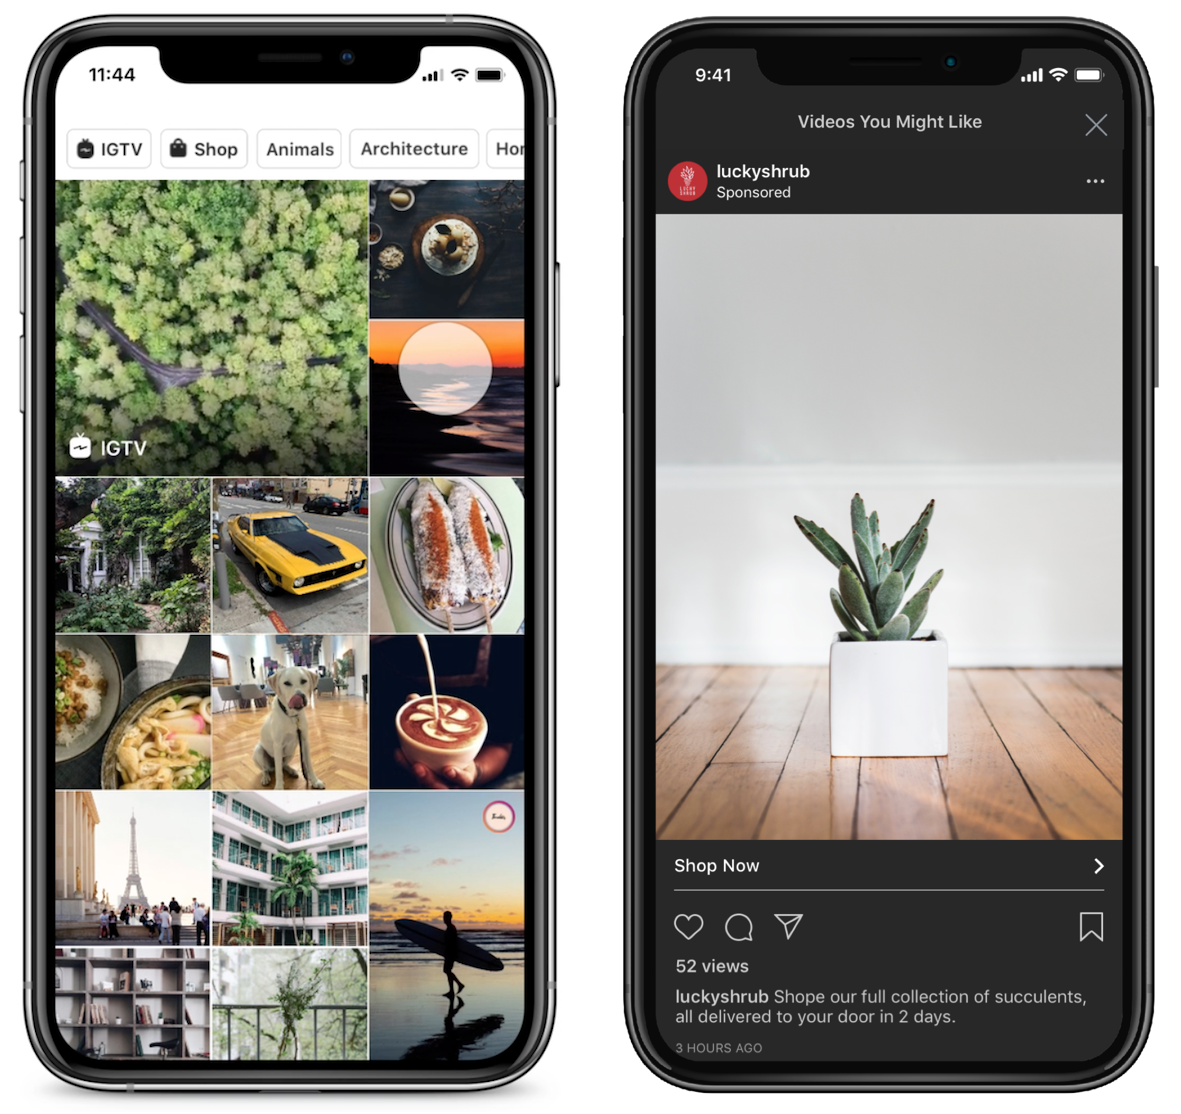 Facebook squeezes money from Instagram with new ads in Explore | TechCrunch